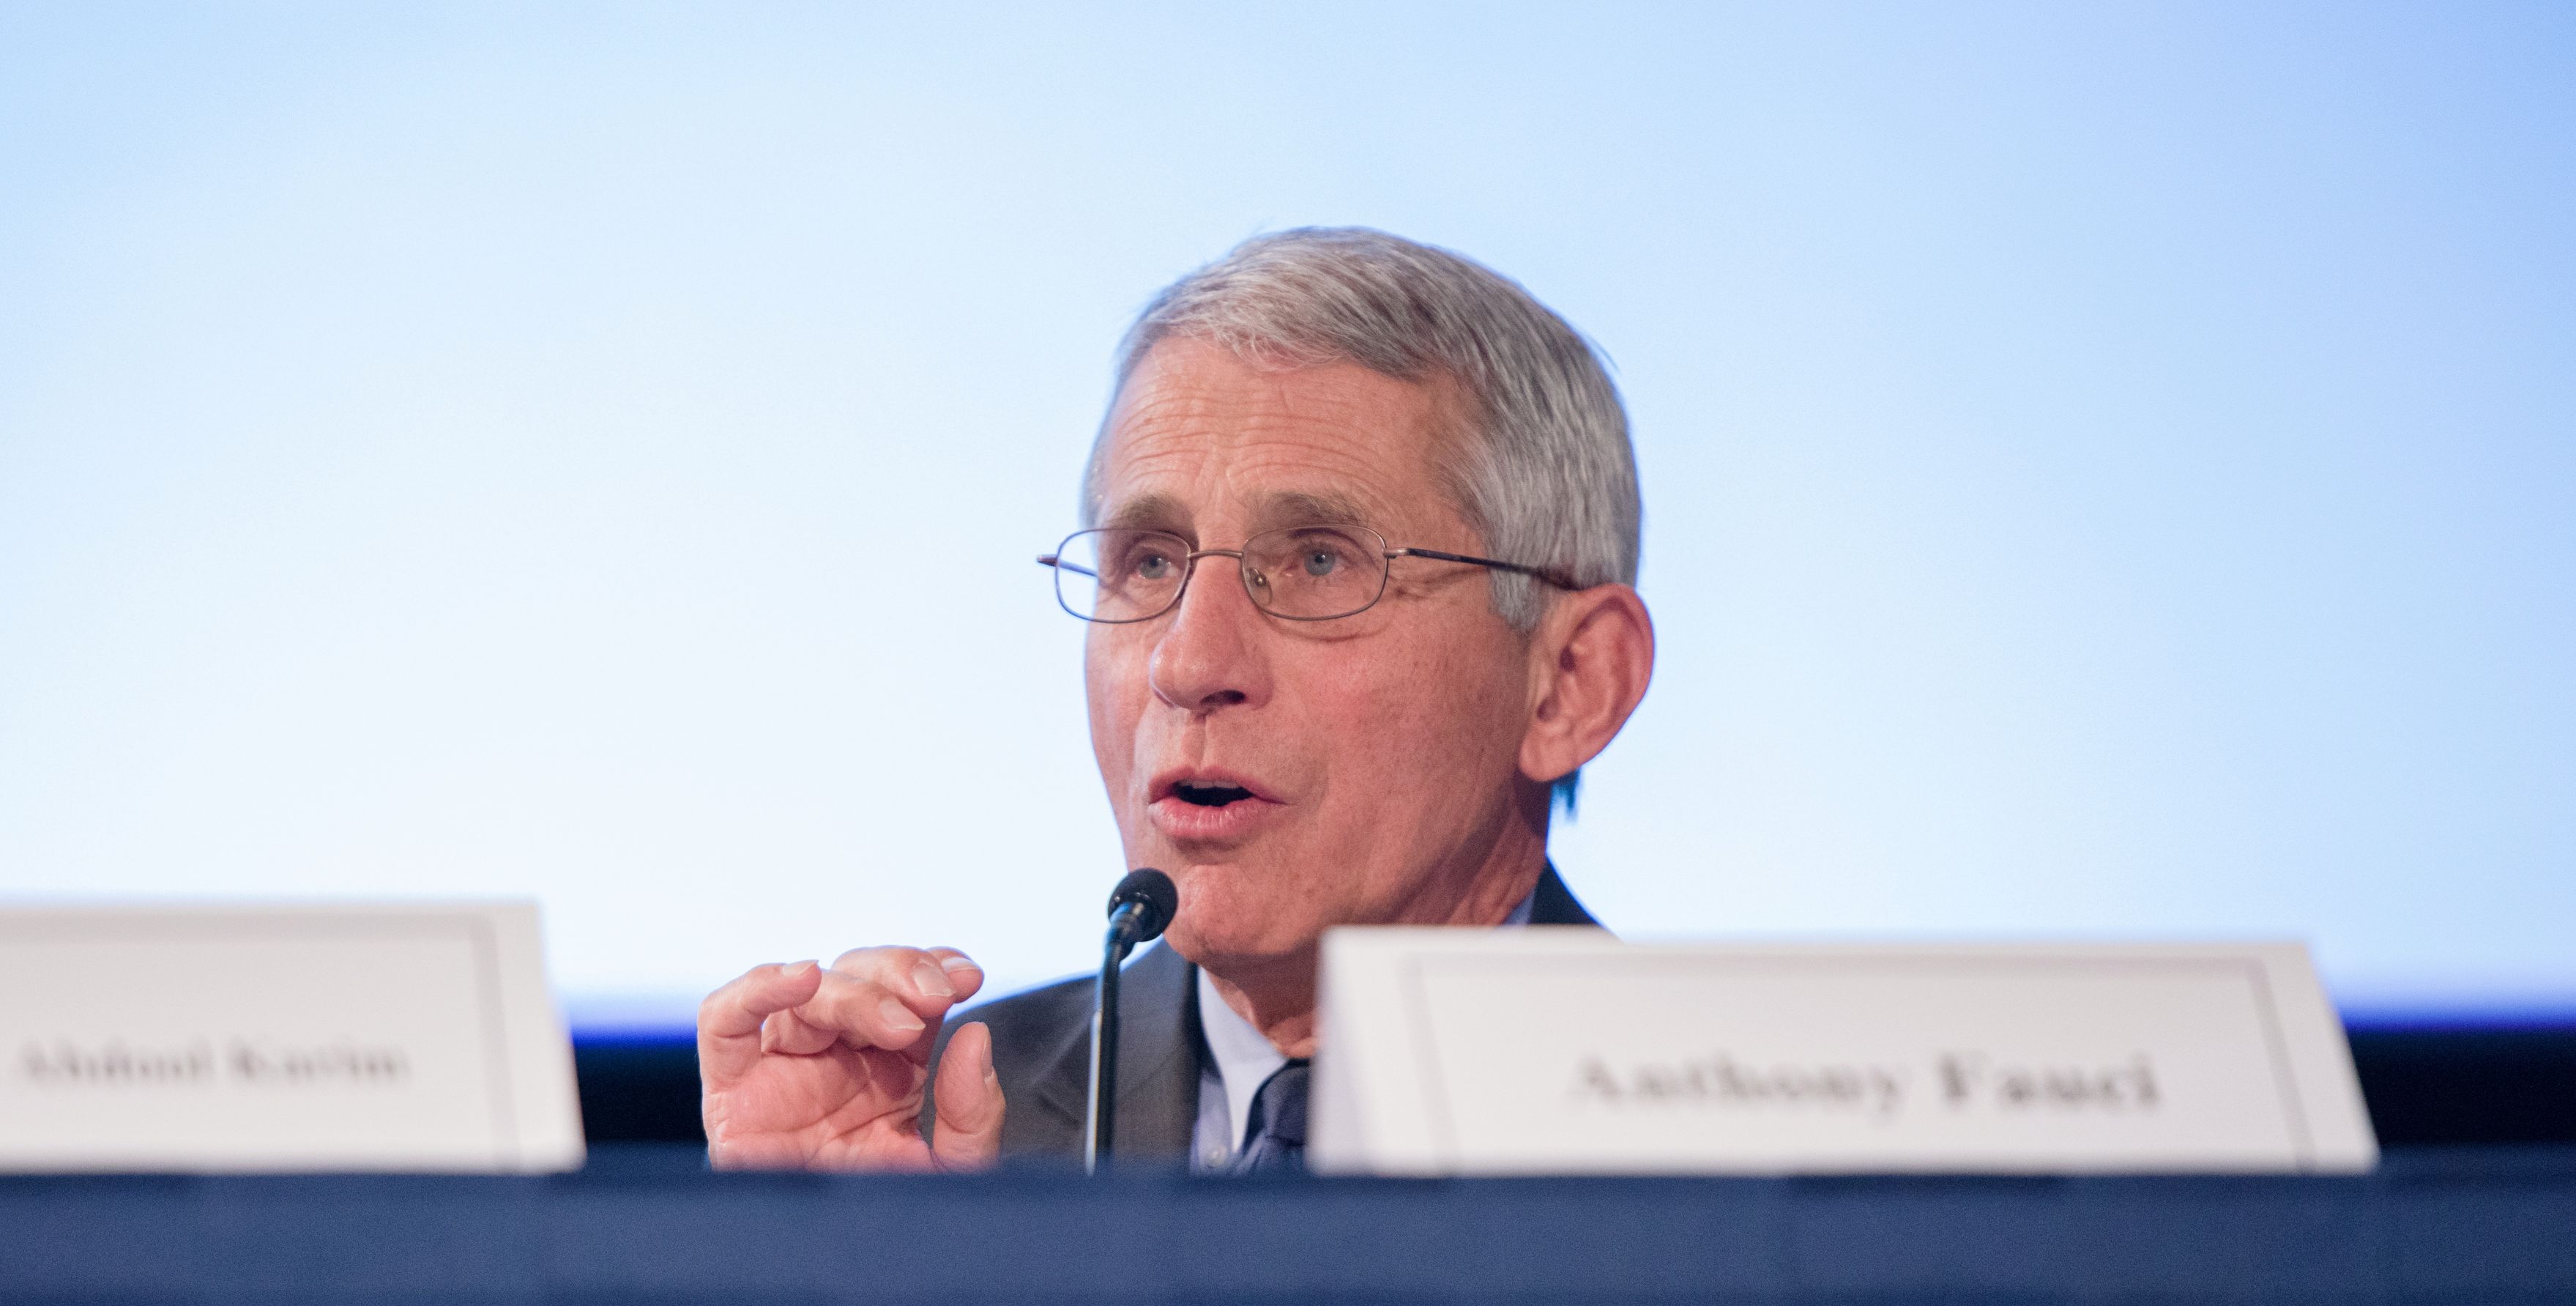 Dr. Anthony Fauci delivers remarks.